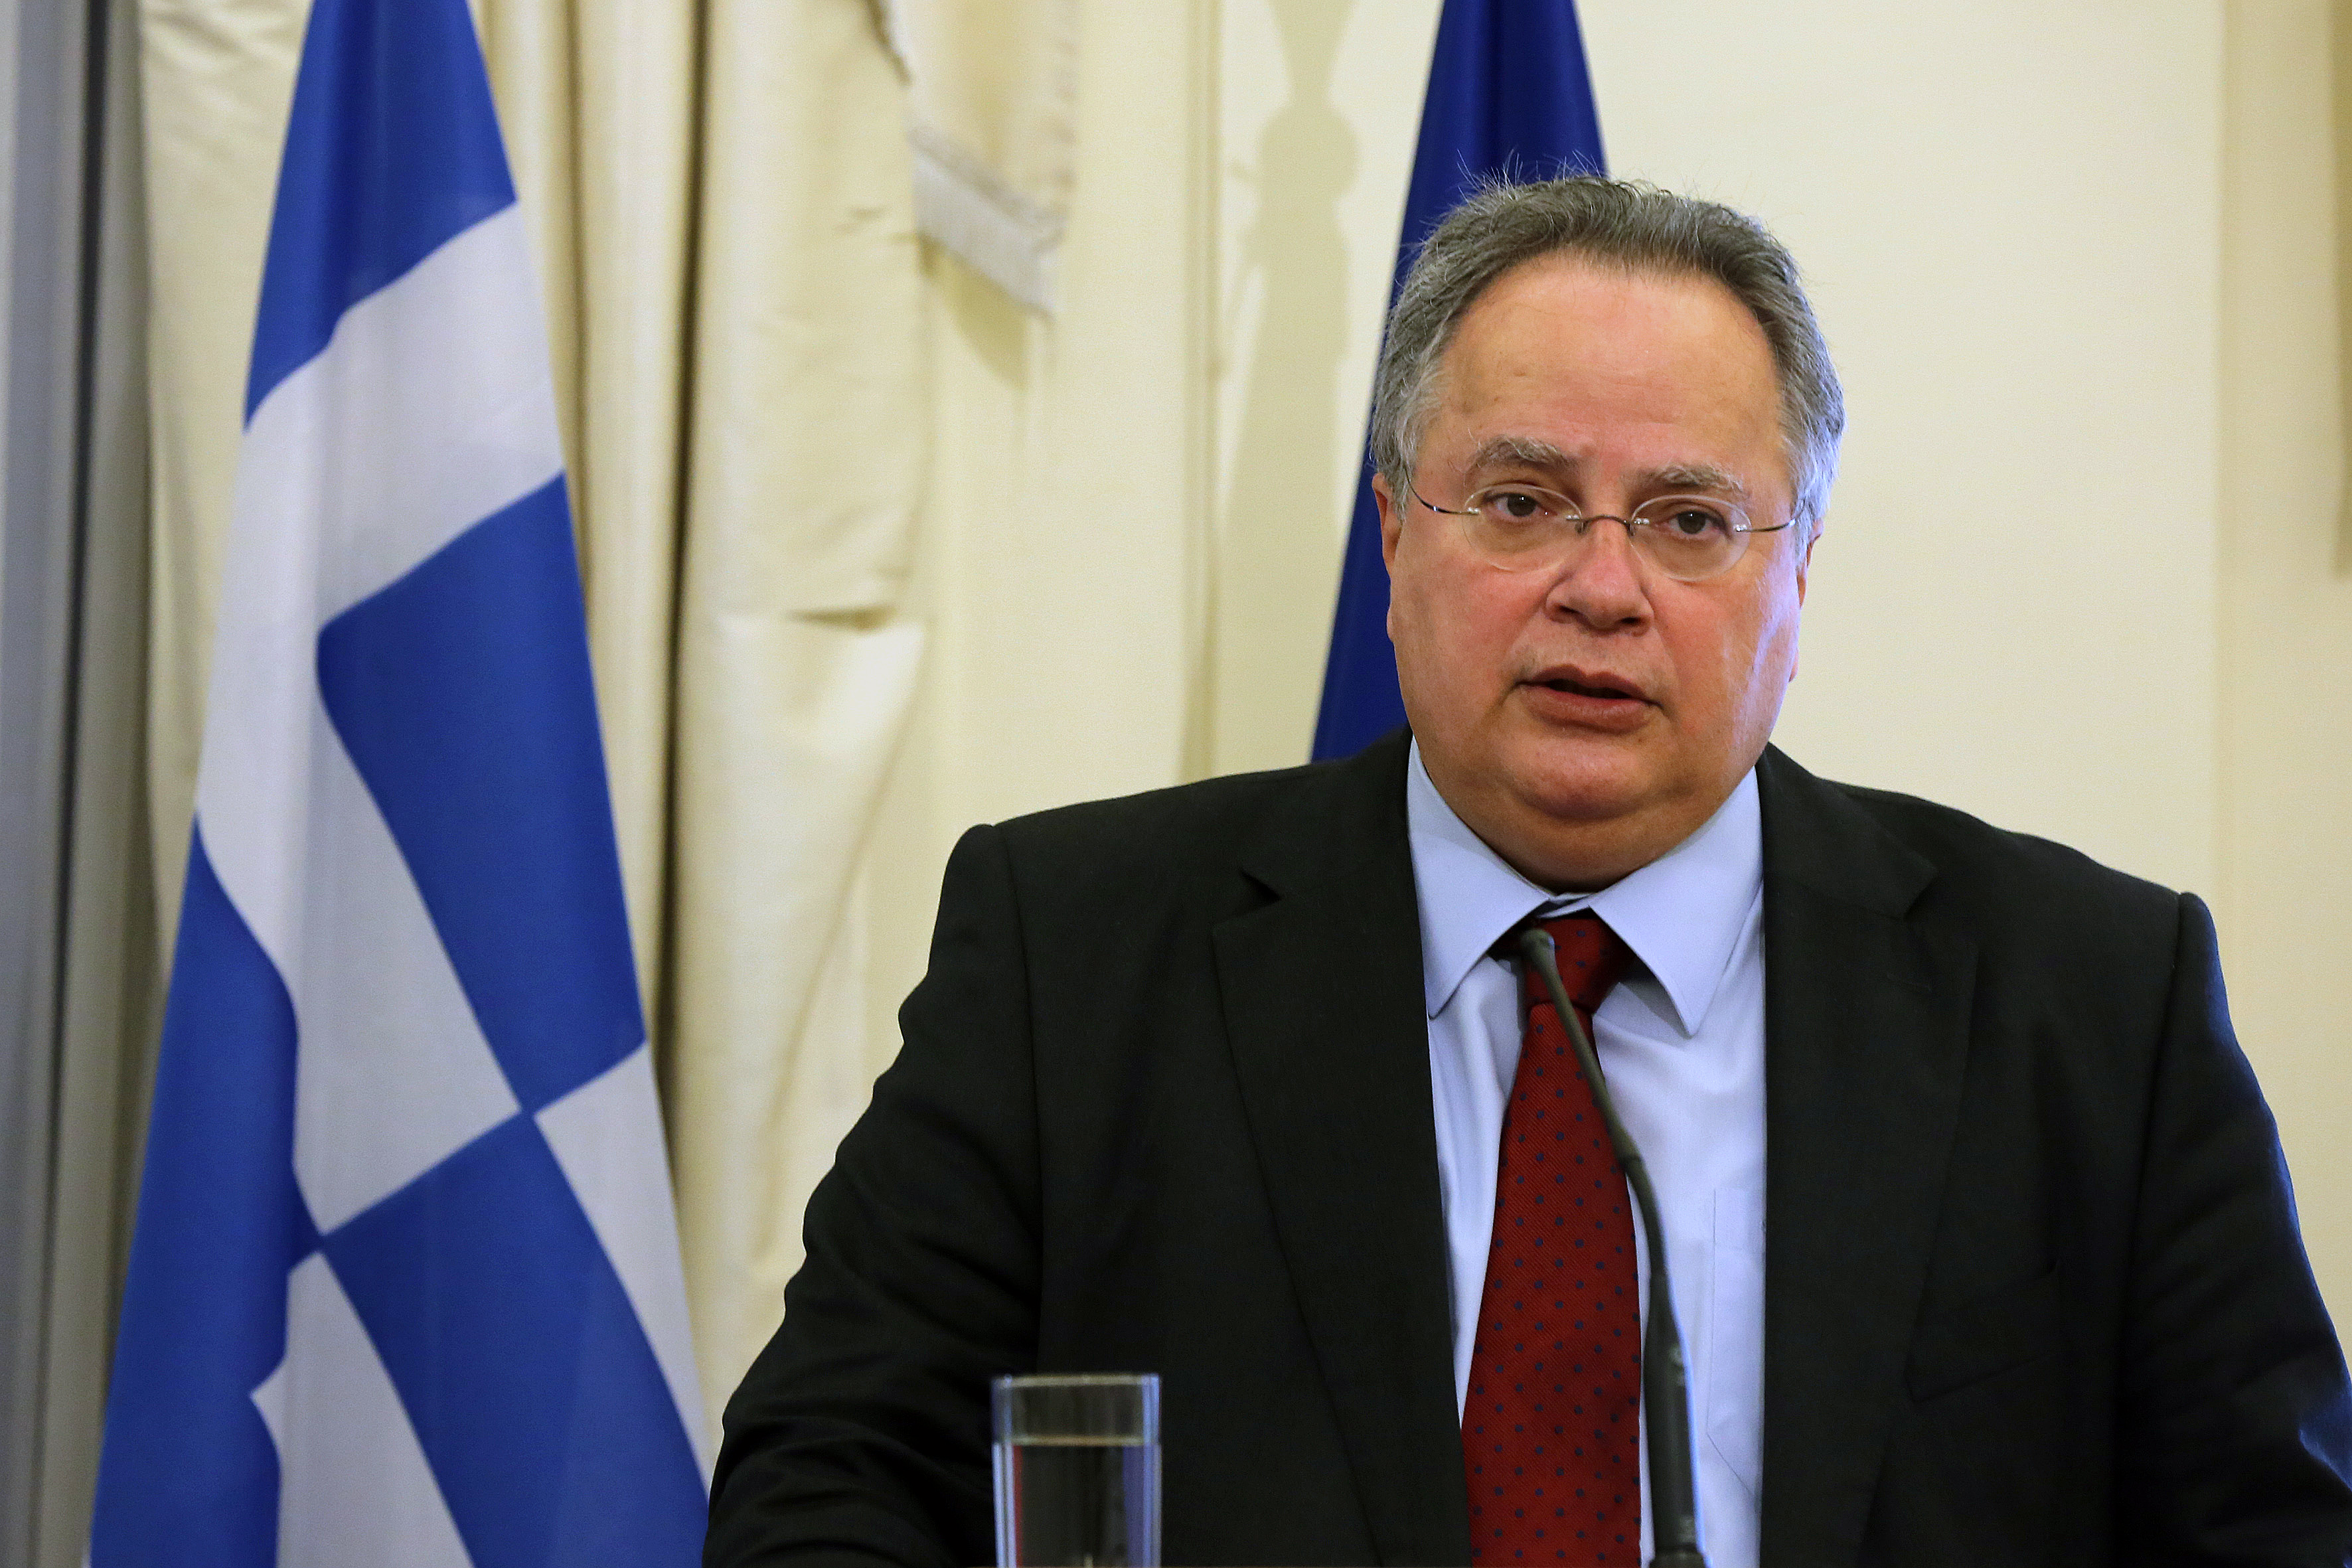 Kotzias arranges to meet with Austrian and Slovak counterparts